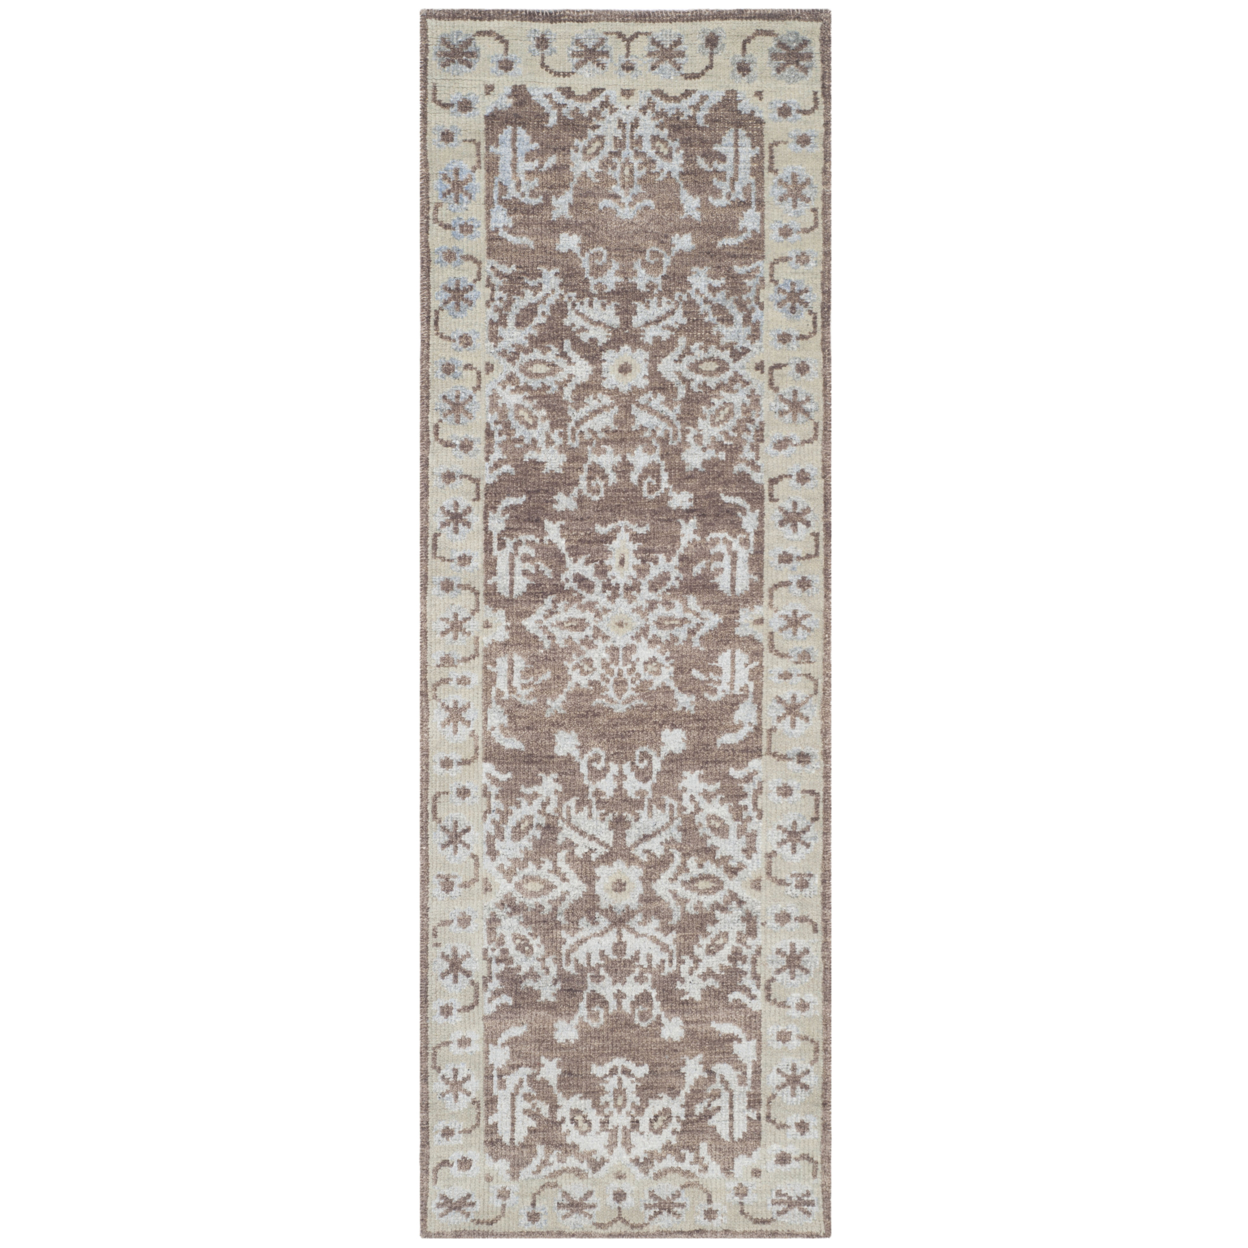 SAFAVIEH Stone Wash STW216A Hand-knotted Charcoal Rug - 5' X 8'